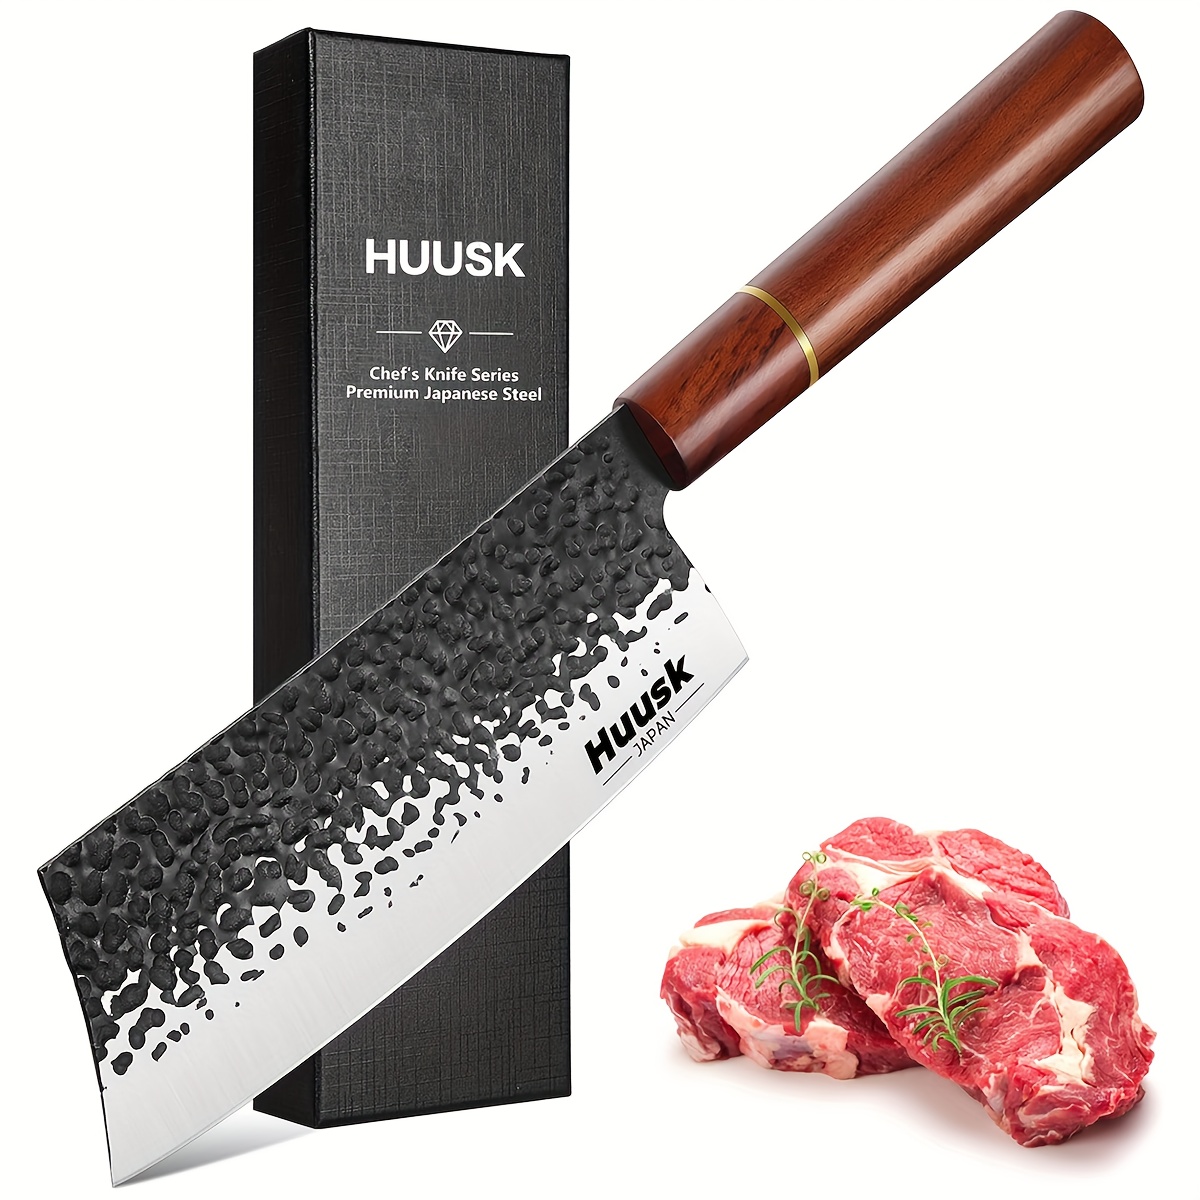 

Huusk Japanese Cleaver Knife For Meat Cutting, 6.7 Inch Hand Forged Chef Knife High Carbon Steel Sharp Kitchen Knife For Chopping Vegetable, Gift For Dad